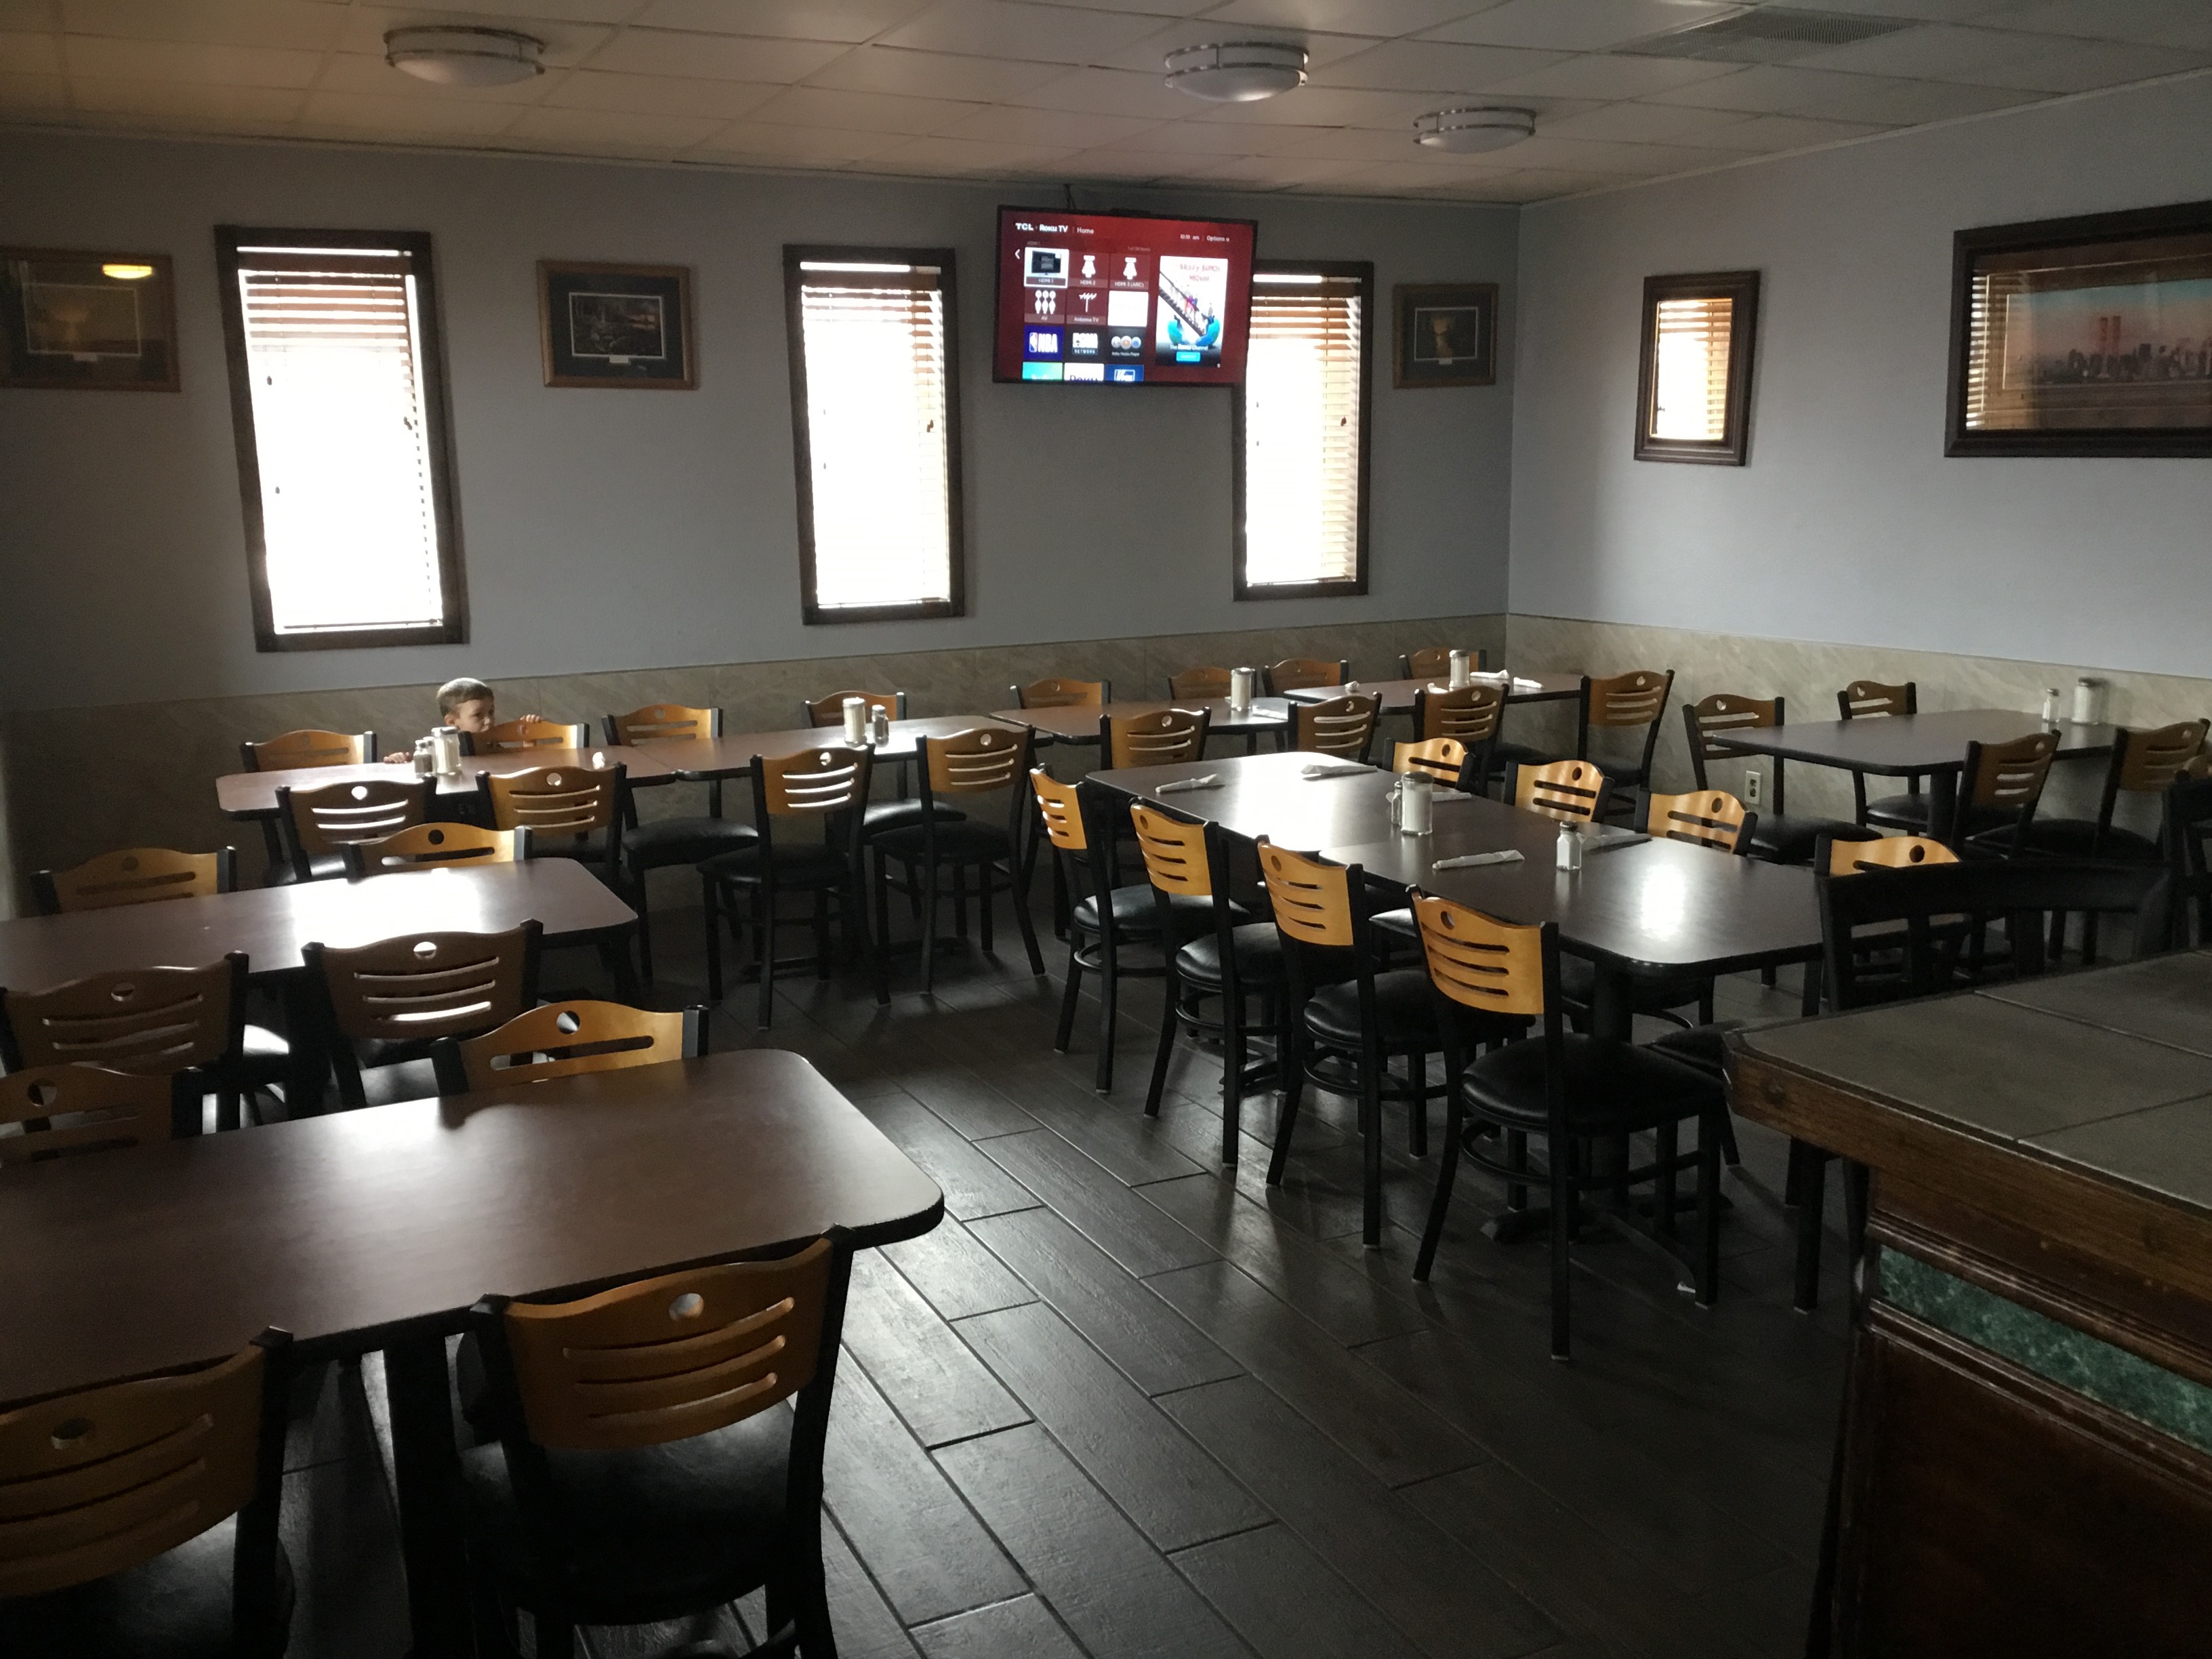 Red Wheel Restaurant Coupons near me in Rantoul, IL 61866 | 8coupons